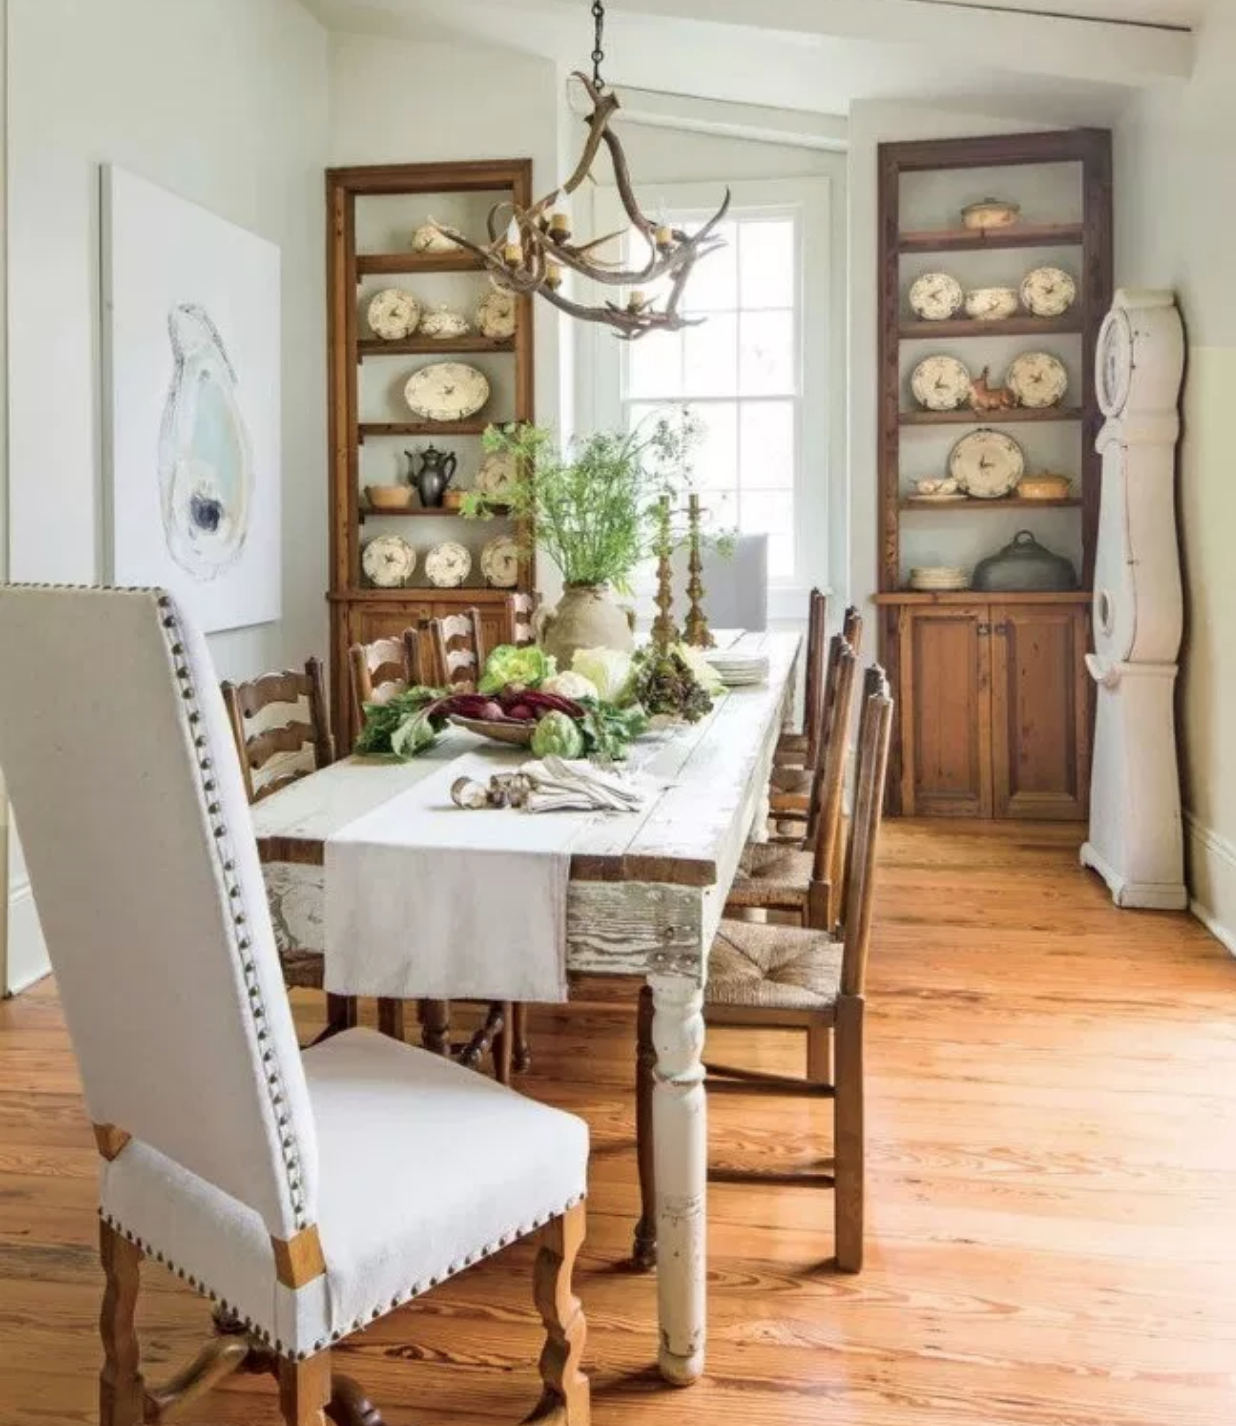 An interior designer shares things she always makes sure she has in her home Image